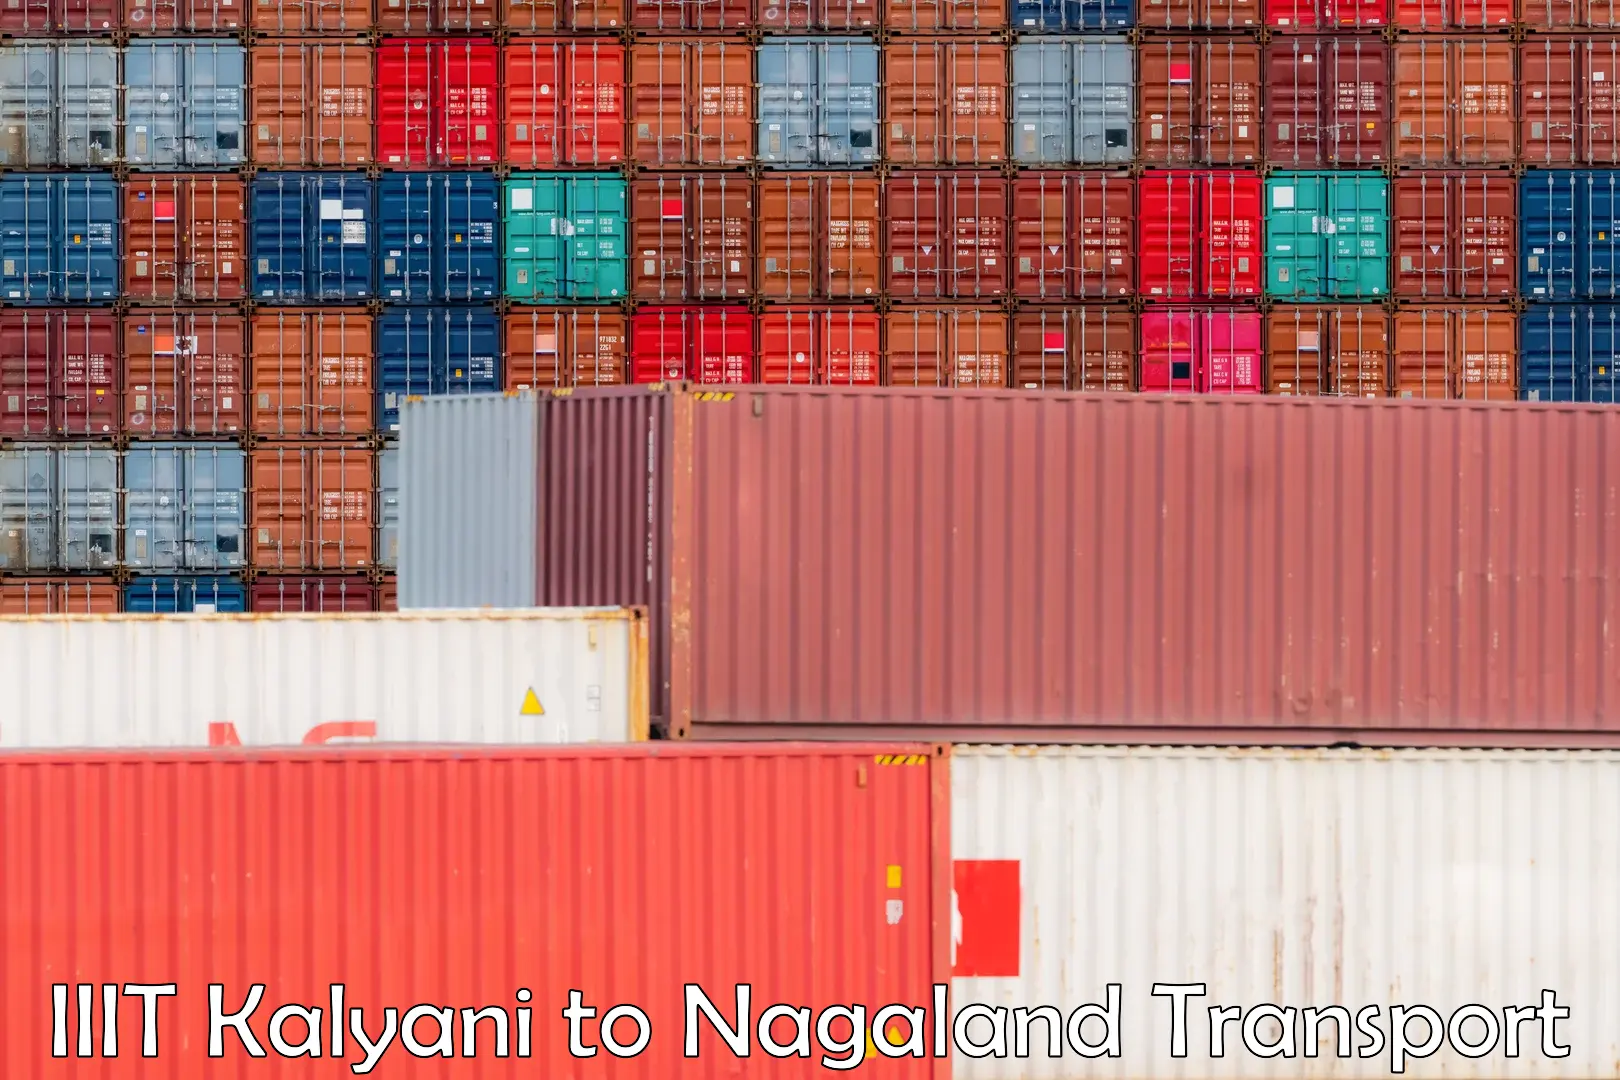 Air freight transport services in IIIT Kalyani to NIT Nagaland